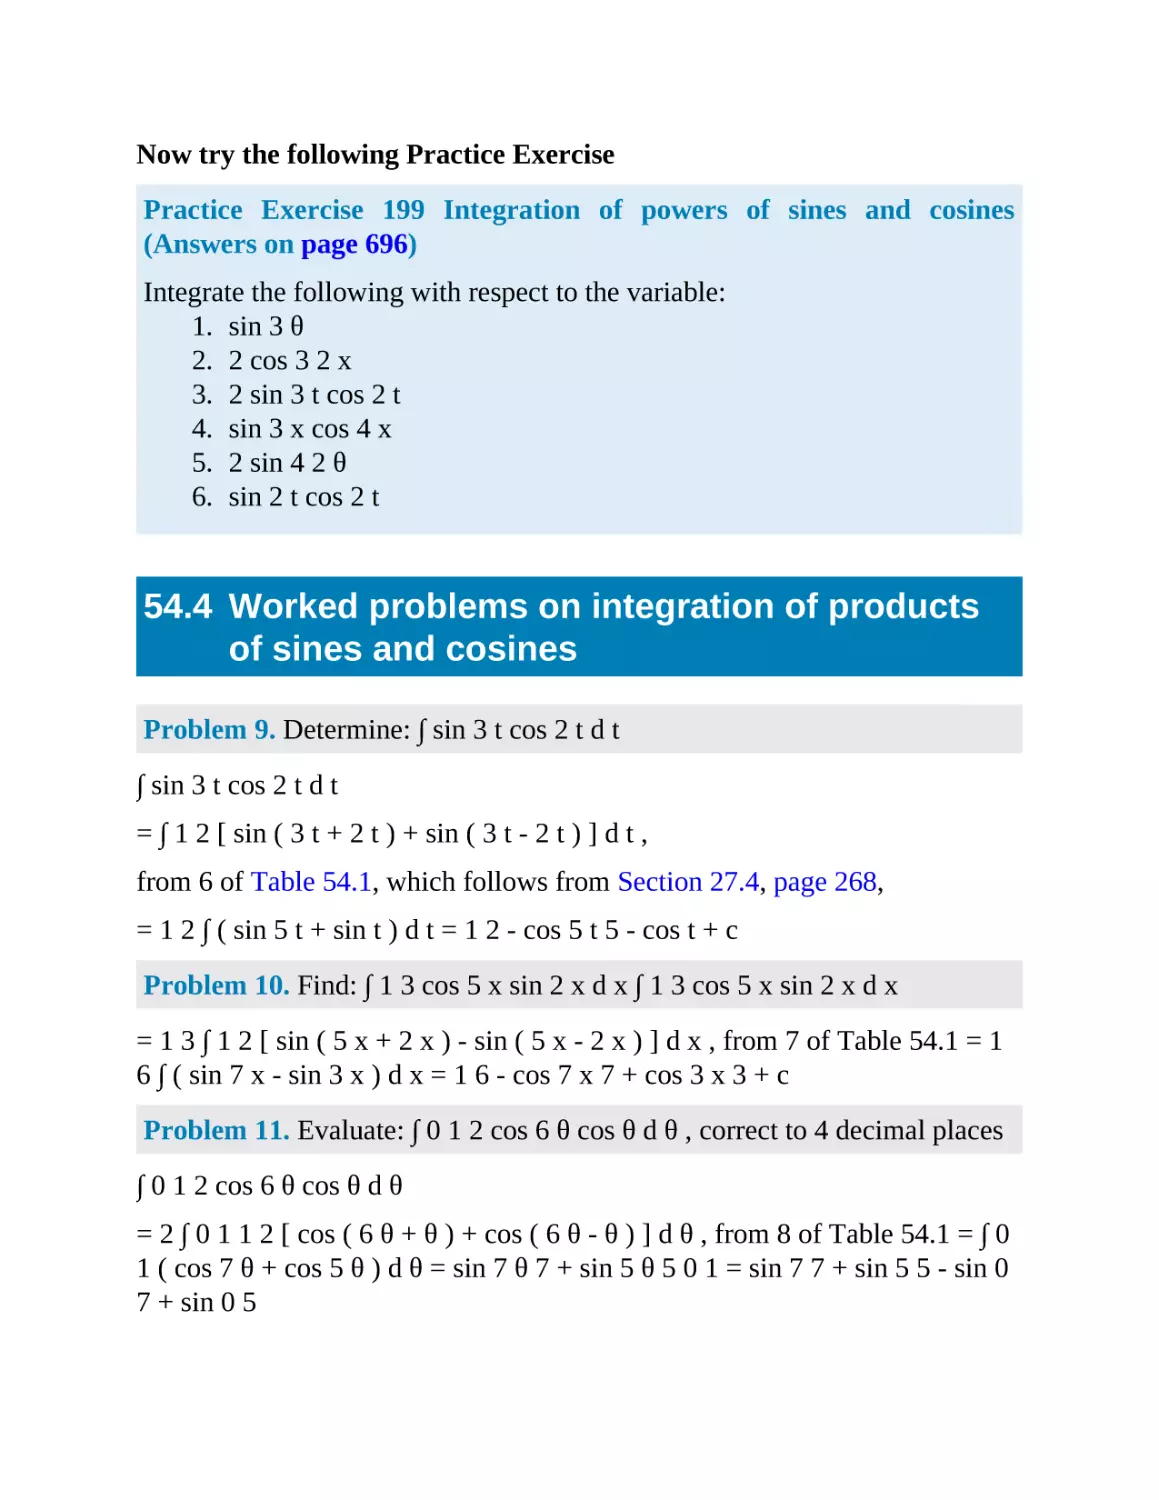 54.4 Worked problems on integration of products of sines and cosines